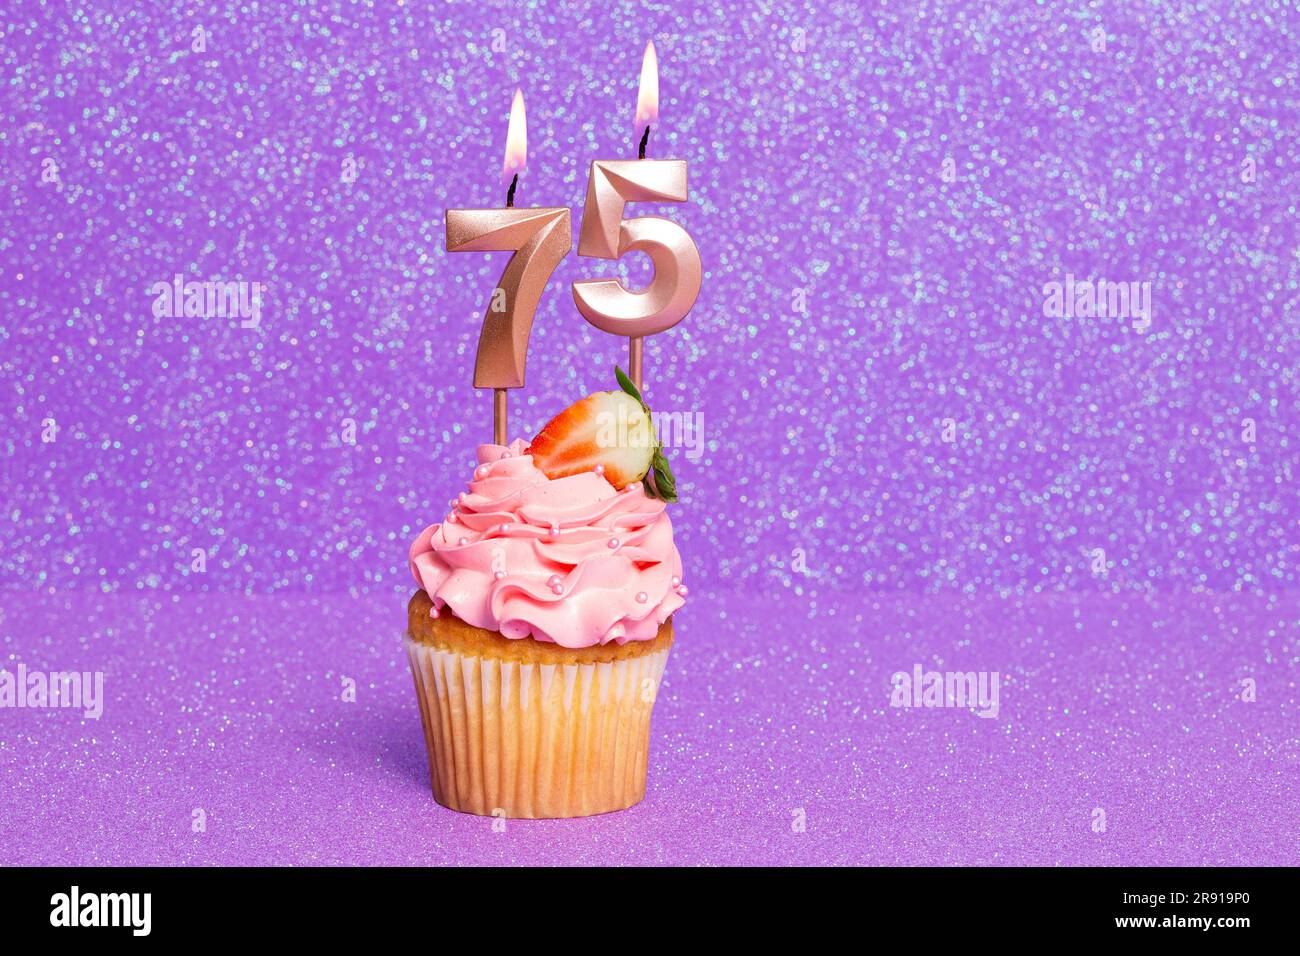 Cupcake With Number For Celebration Of Birthday Or Anniversary; Number 75 Stock Photo